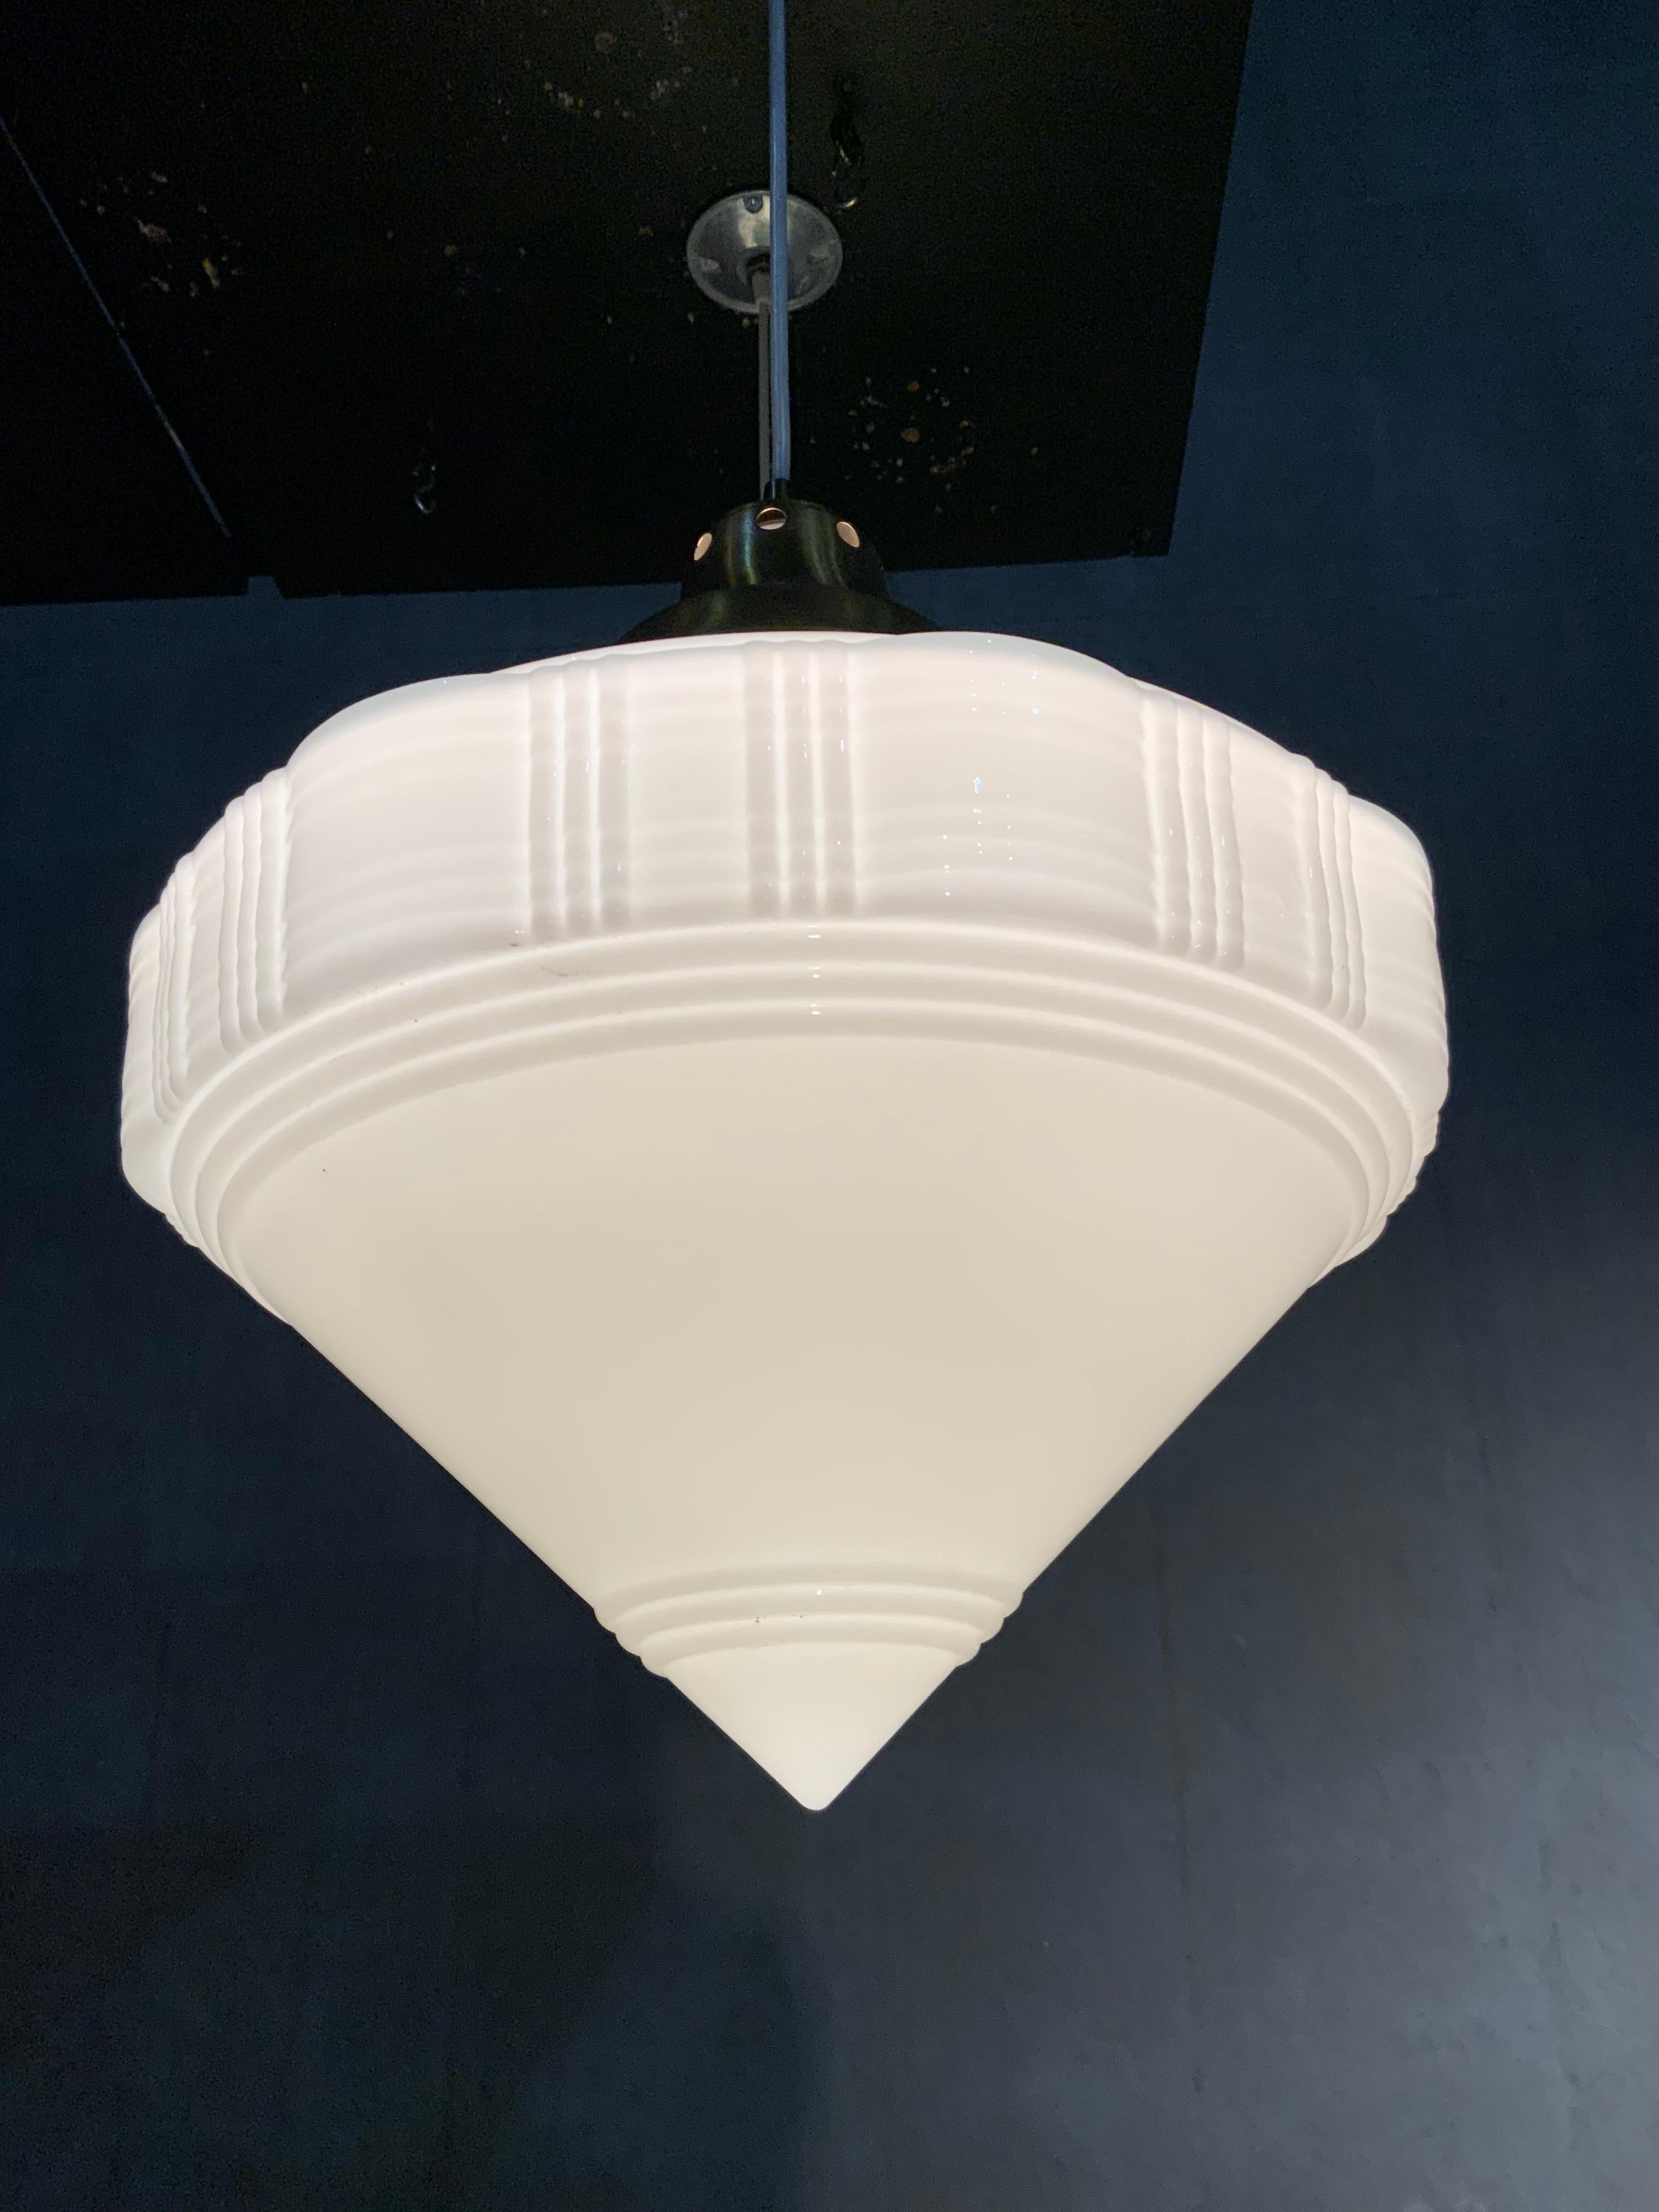 We have a set of 8 of these oversized Art Deco milk glass pendants salvaged from a bank in Eastern USA. They are on brass fitters and simple cable for easy adjustment and a cleaner refined look. 

These are a very nice unique shade.